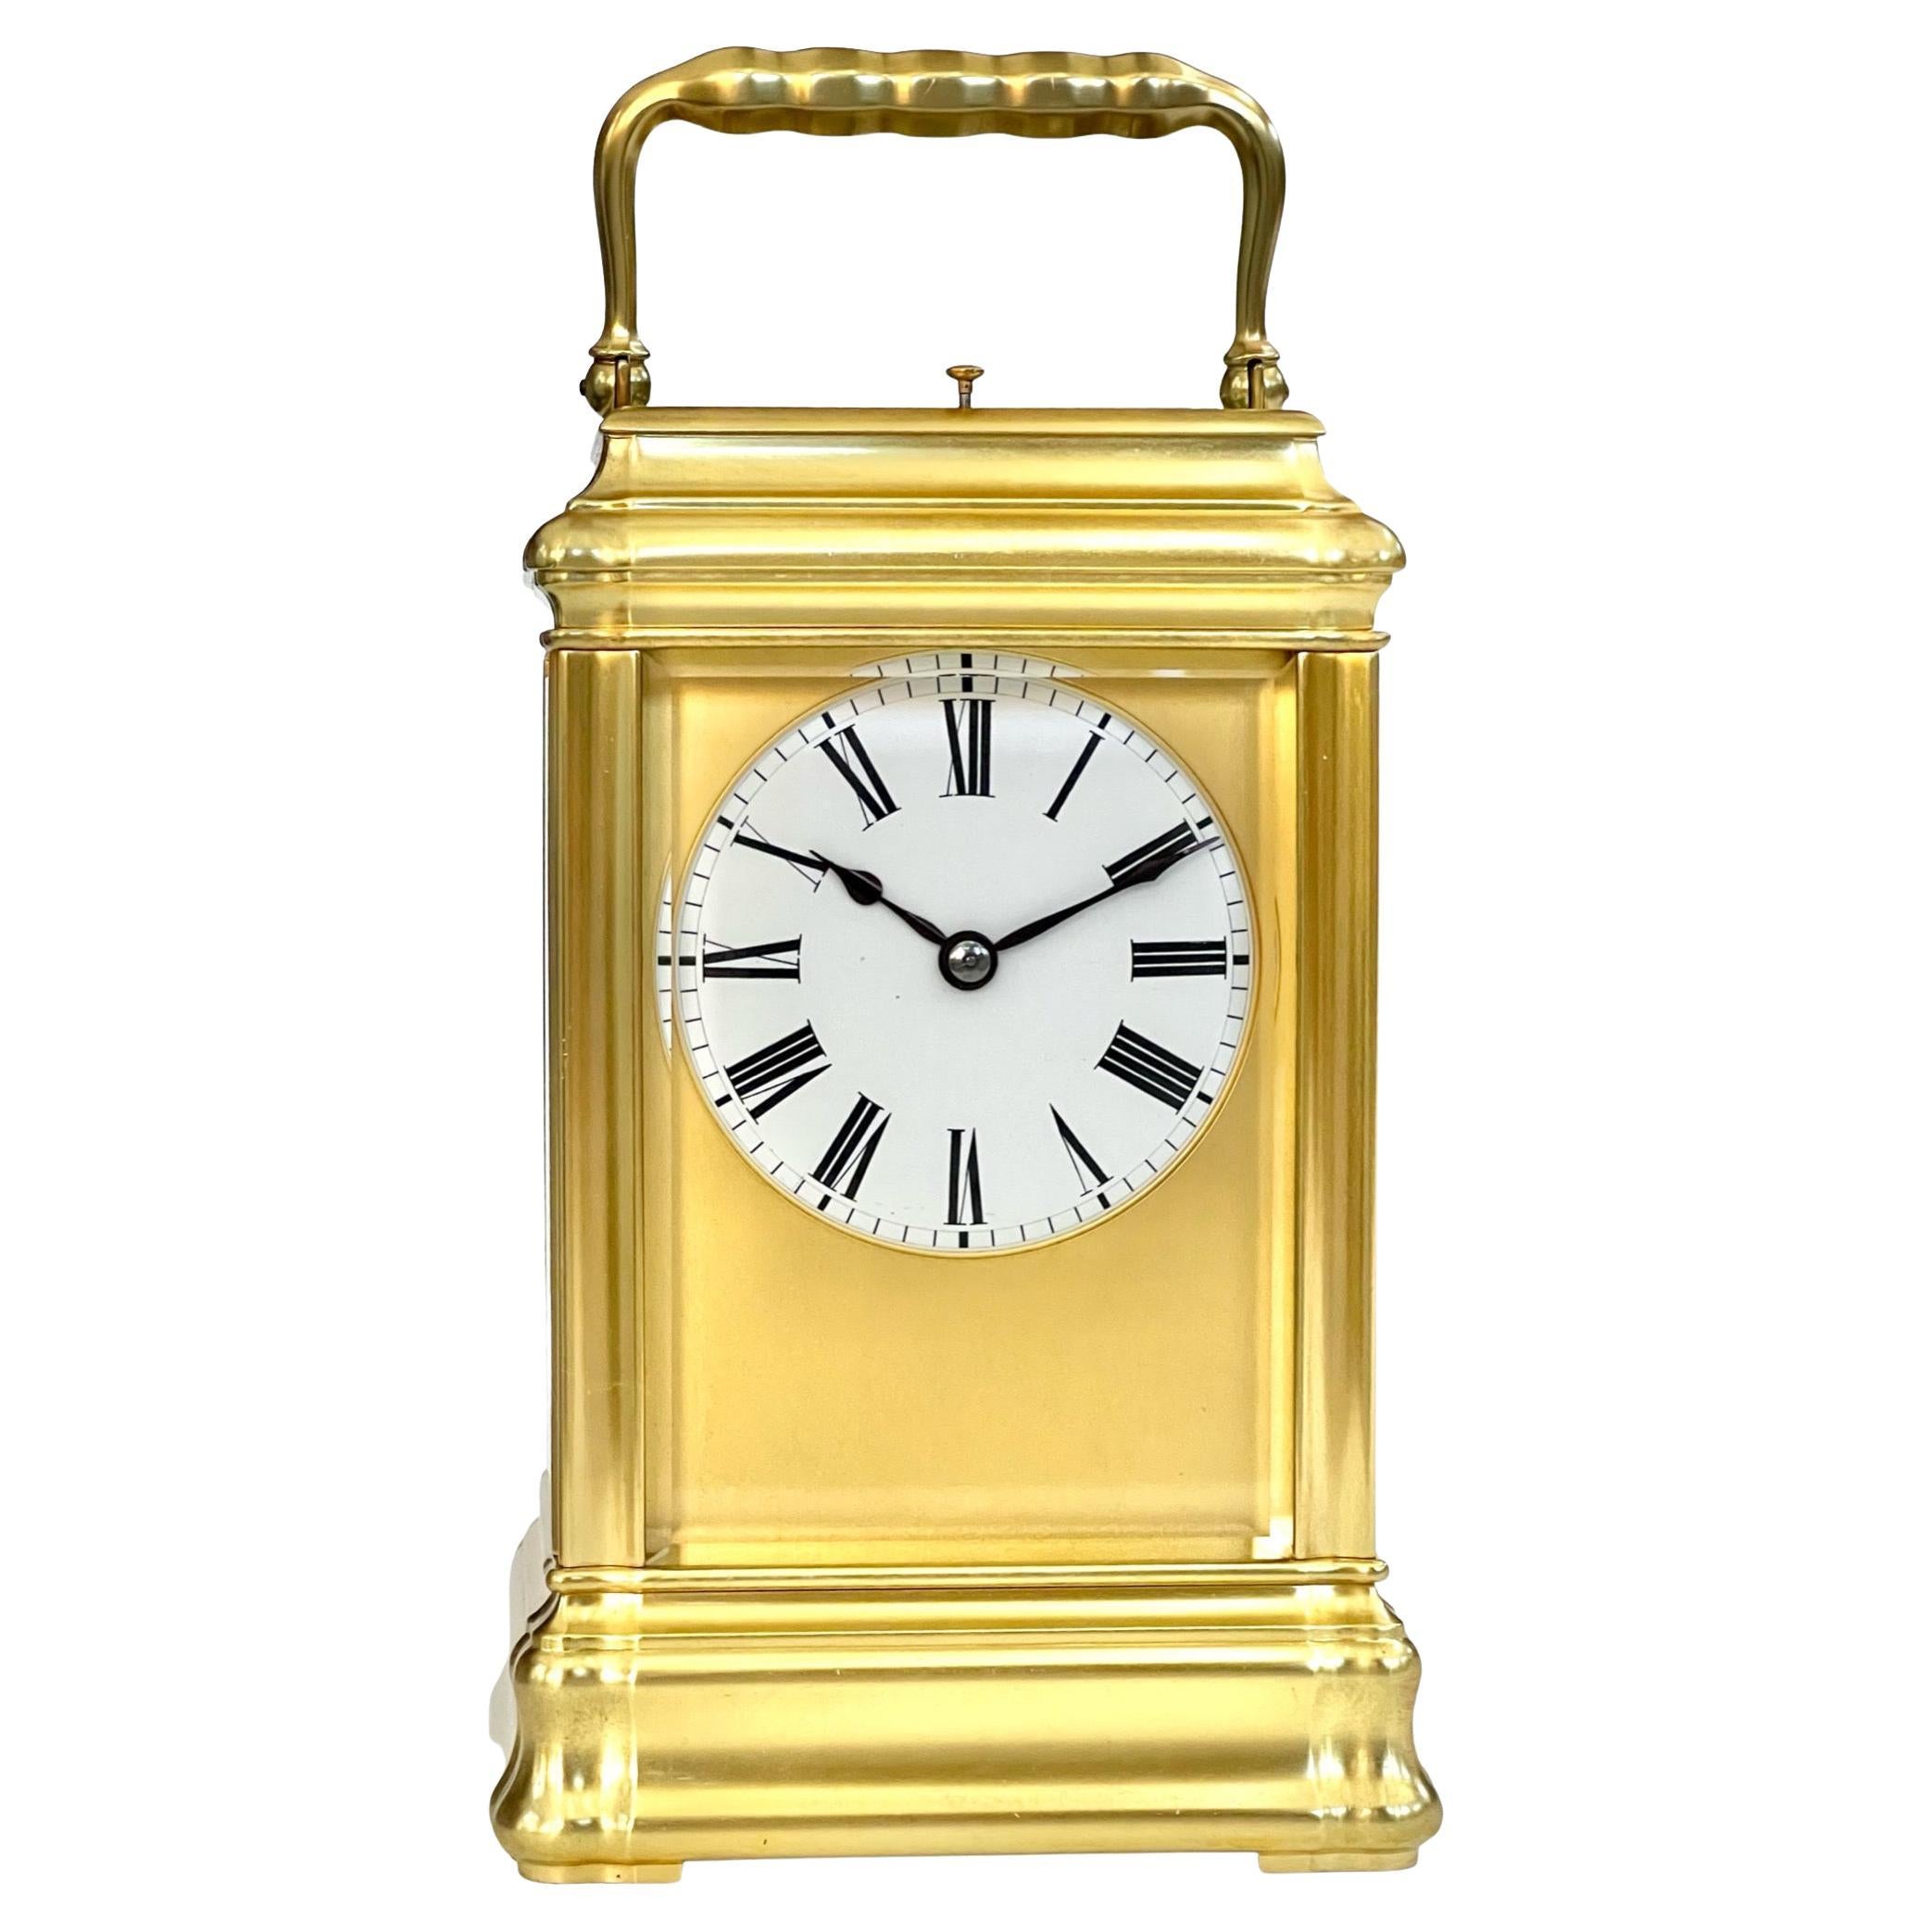 Antique French Giant Gilt Striking and Repeating Carriage Clock by Drocourt